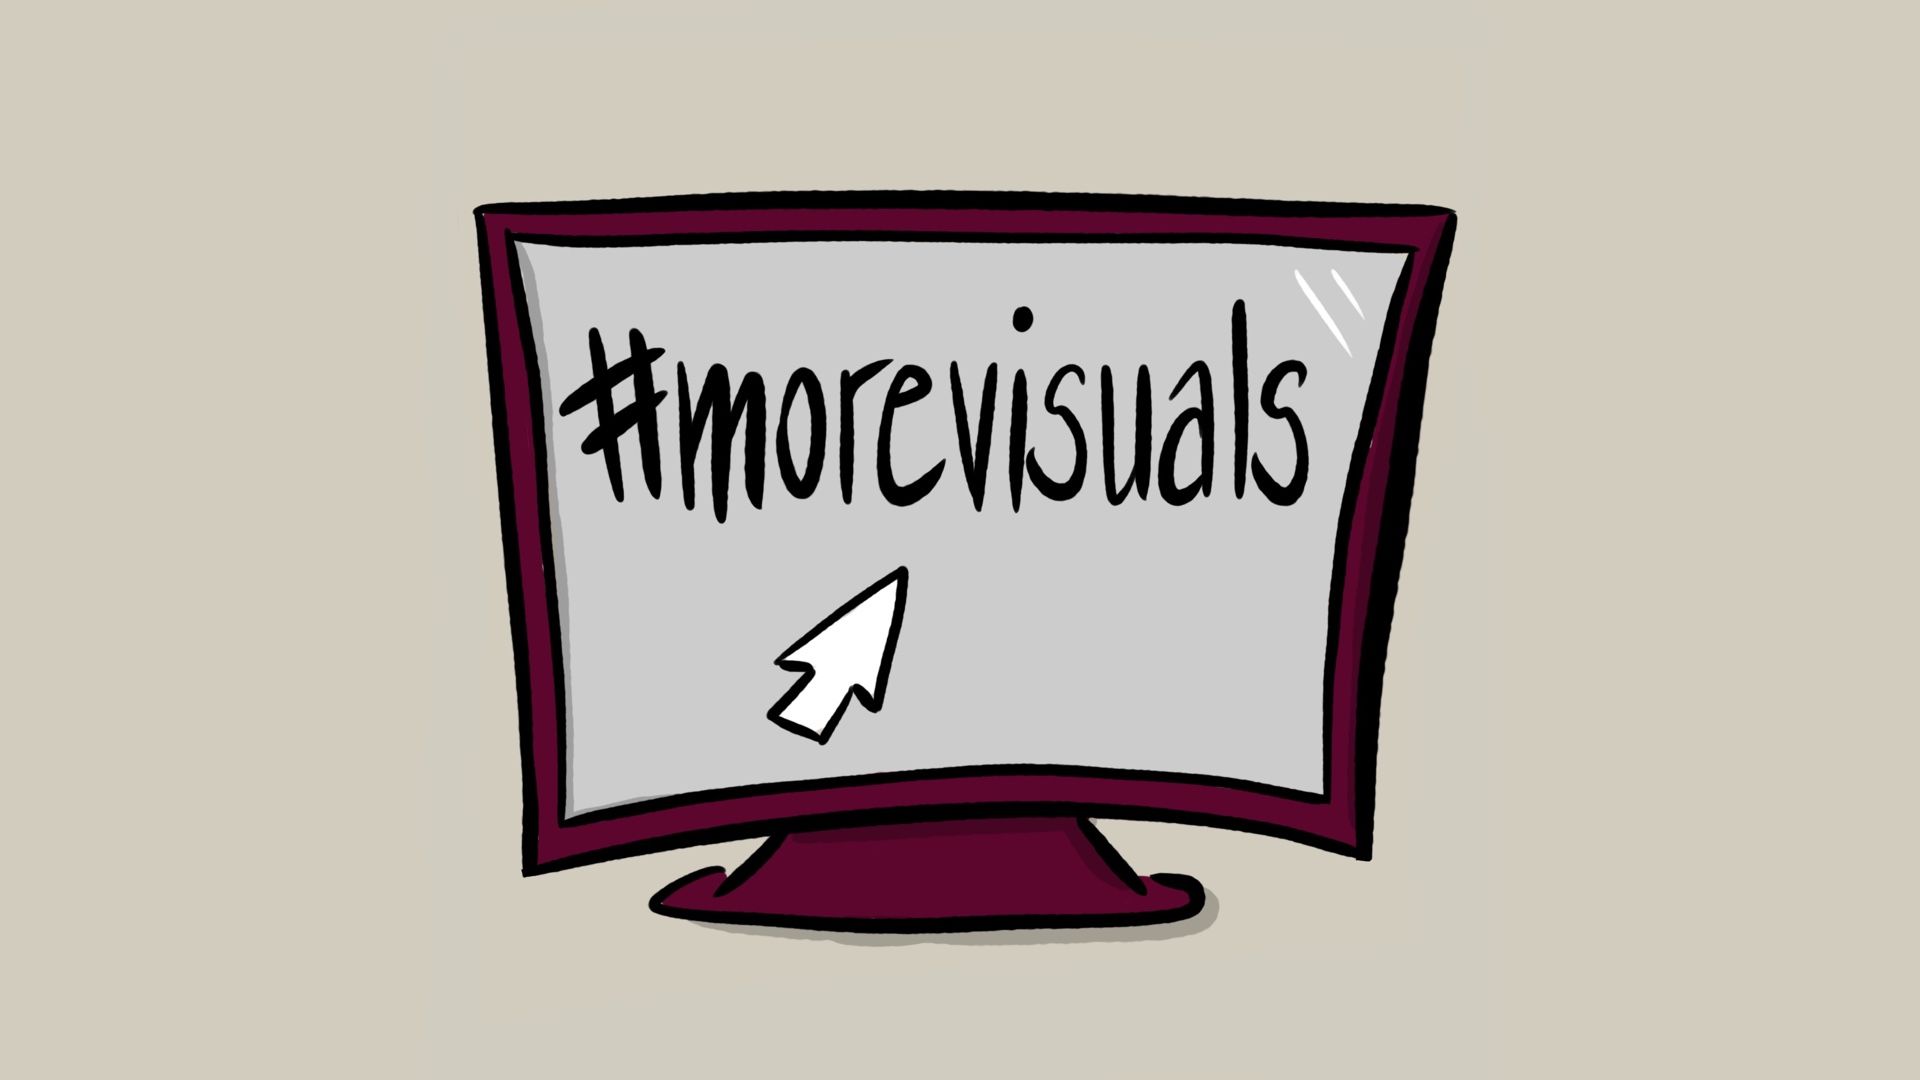 more visuals for the world. #morevisuals on computer screen by speakture